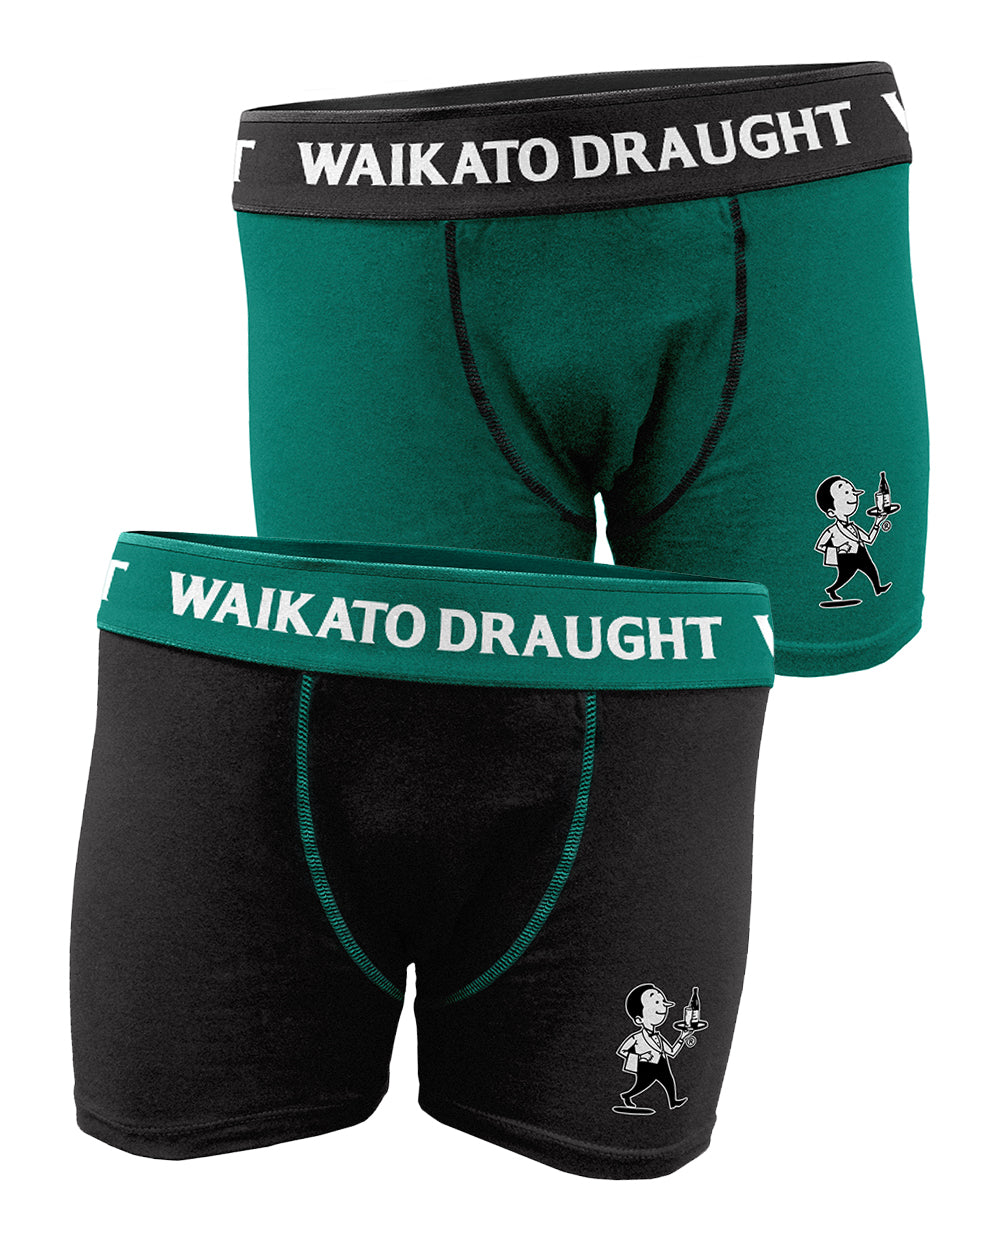 Waikato Draught Boxer Twin Pack -  Beer Gear Apparel & Merchandise - Speights - Lion Red - VB - Tokyo Dy merch